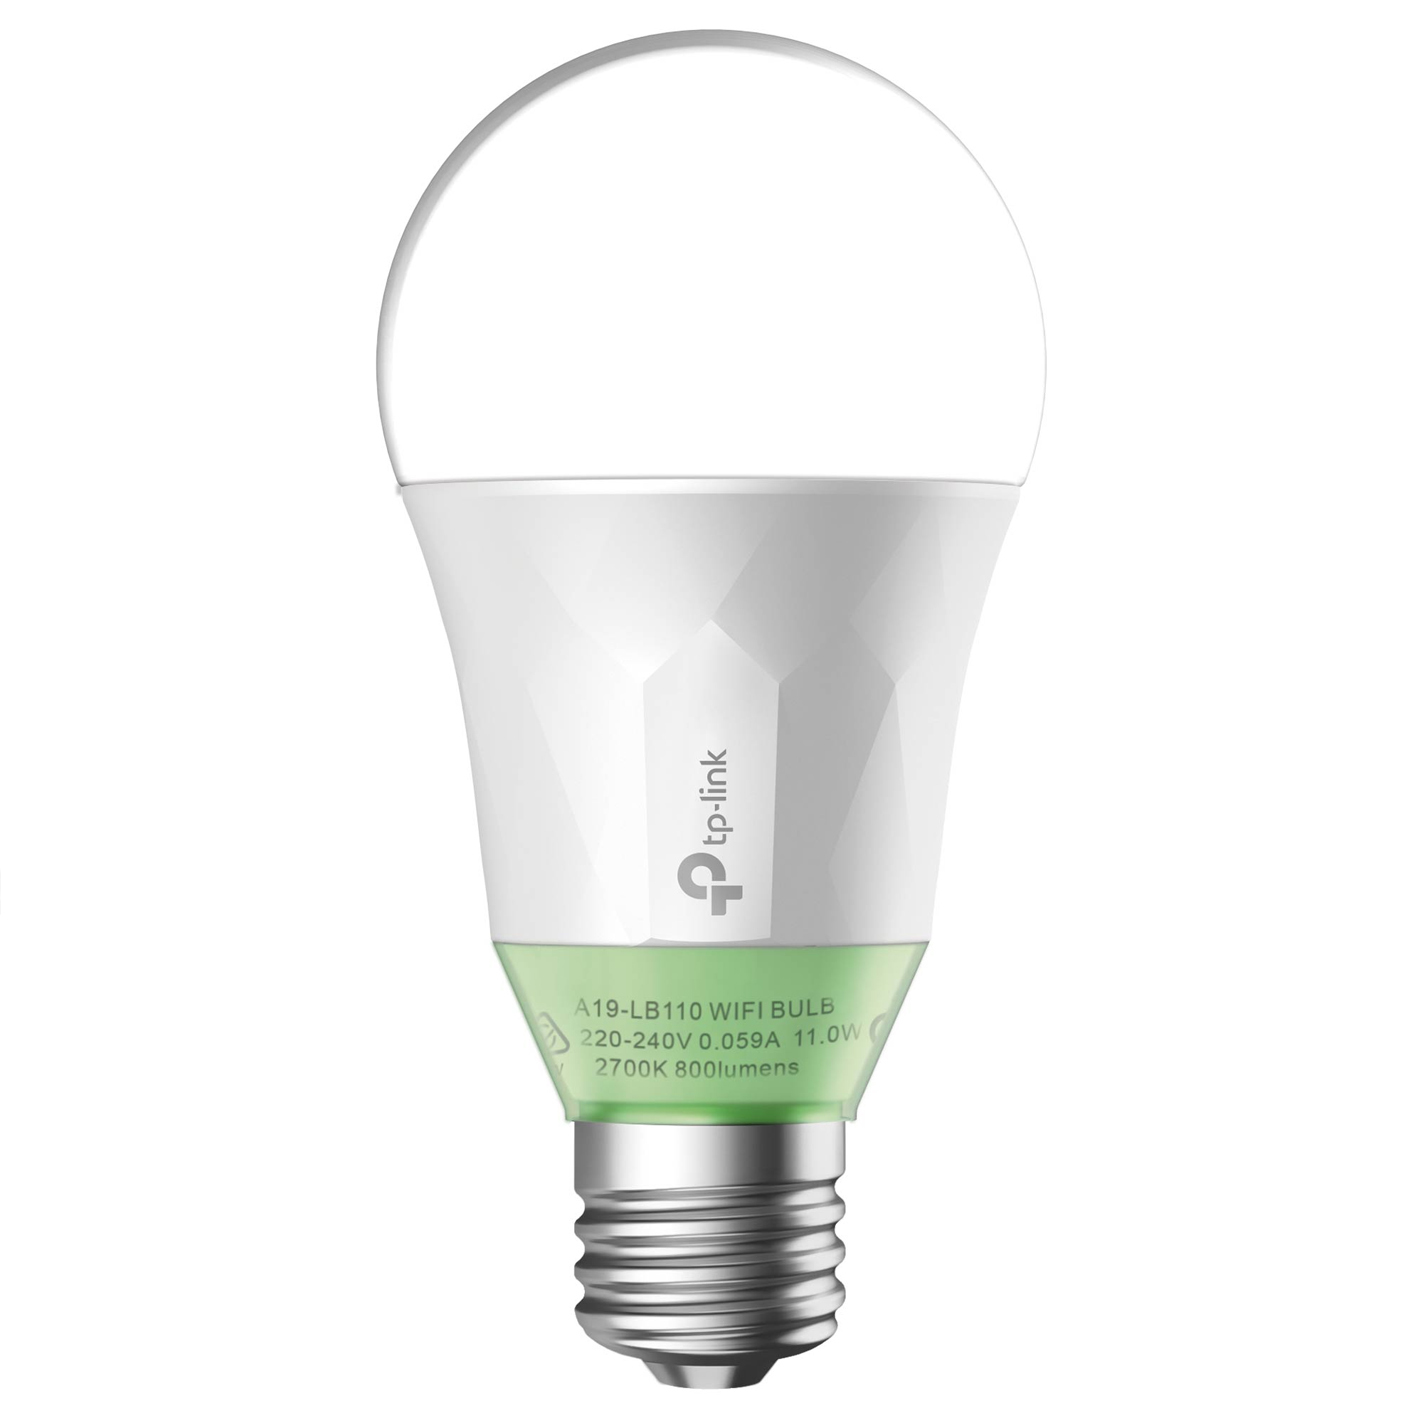 Smart Wi-Fi A19 LED Bulb 220-240V/50Hz 2700K Dimmable White No Hub Required 60WEquivalent 2.4GHz 802.11b/g/n works with TP-LINK's Home Automation app Kasa (for